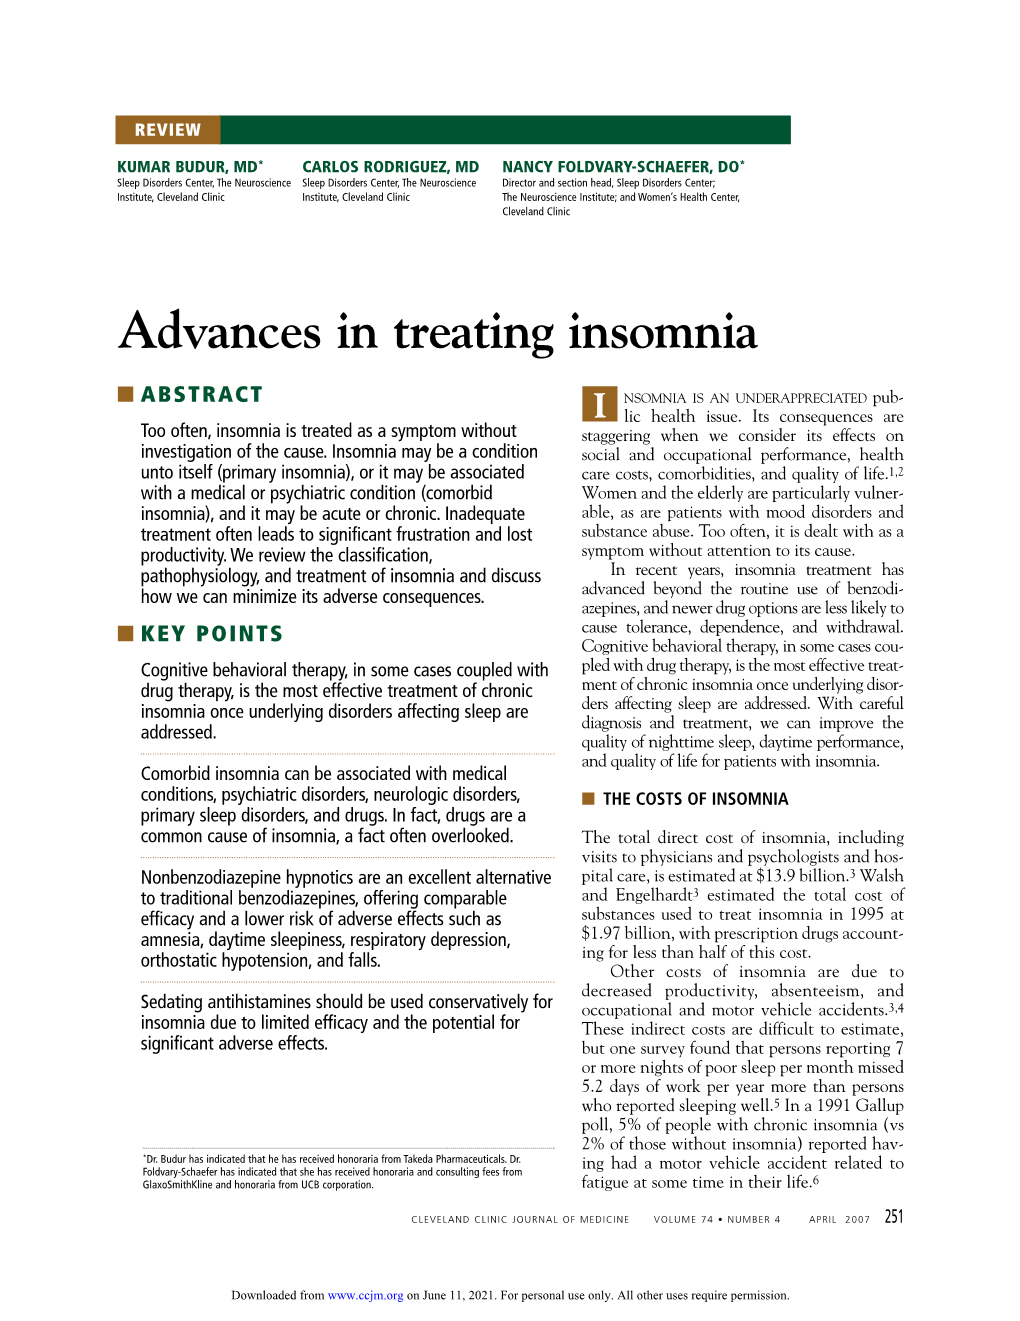 Advances in Treating Insomnia